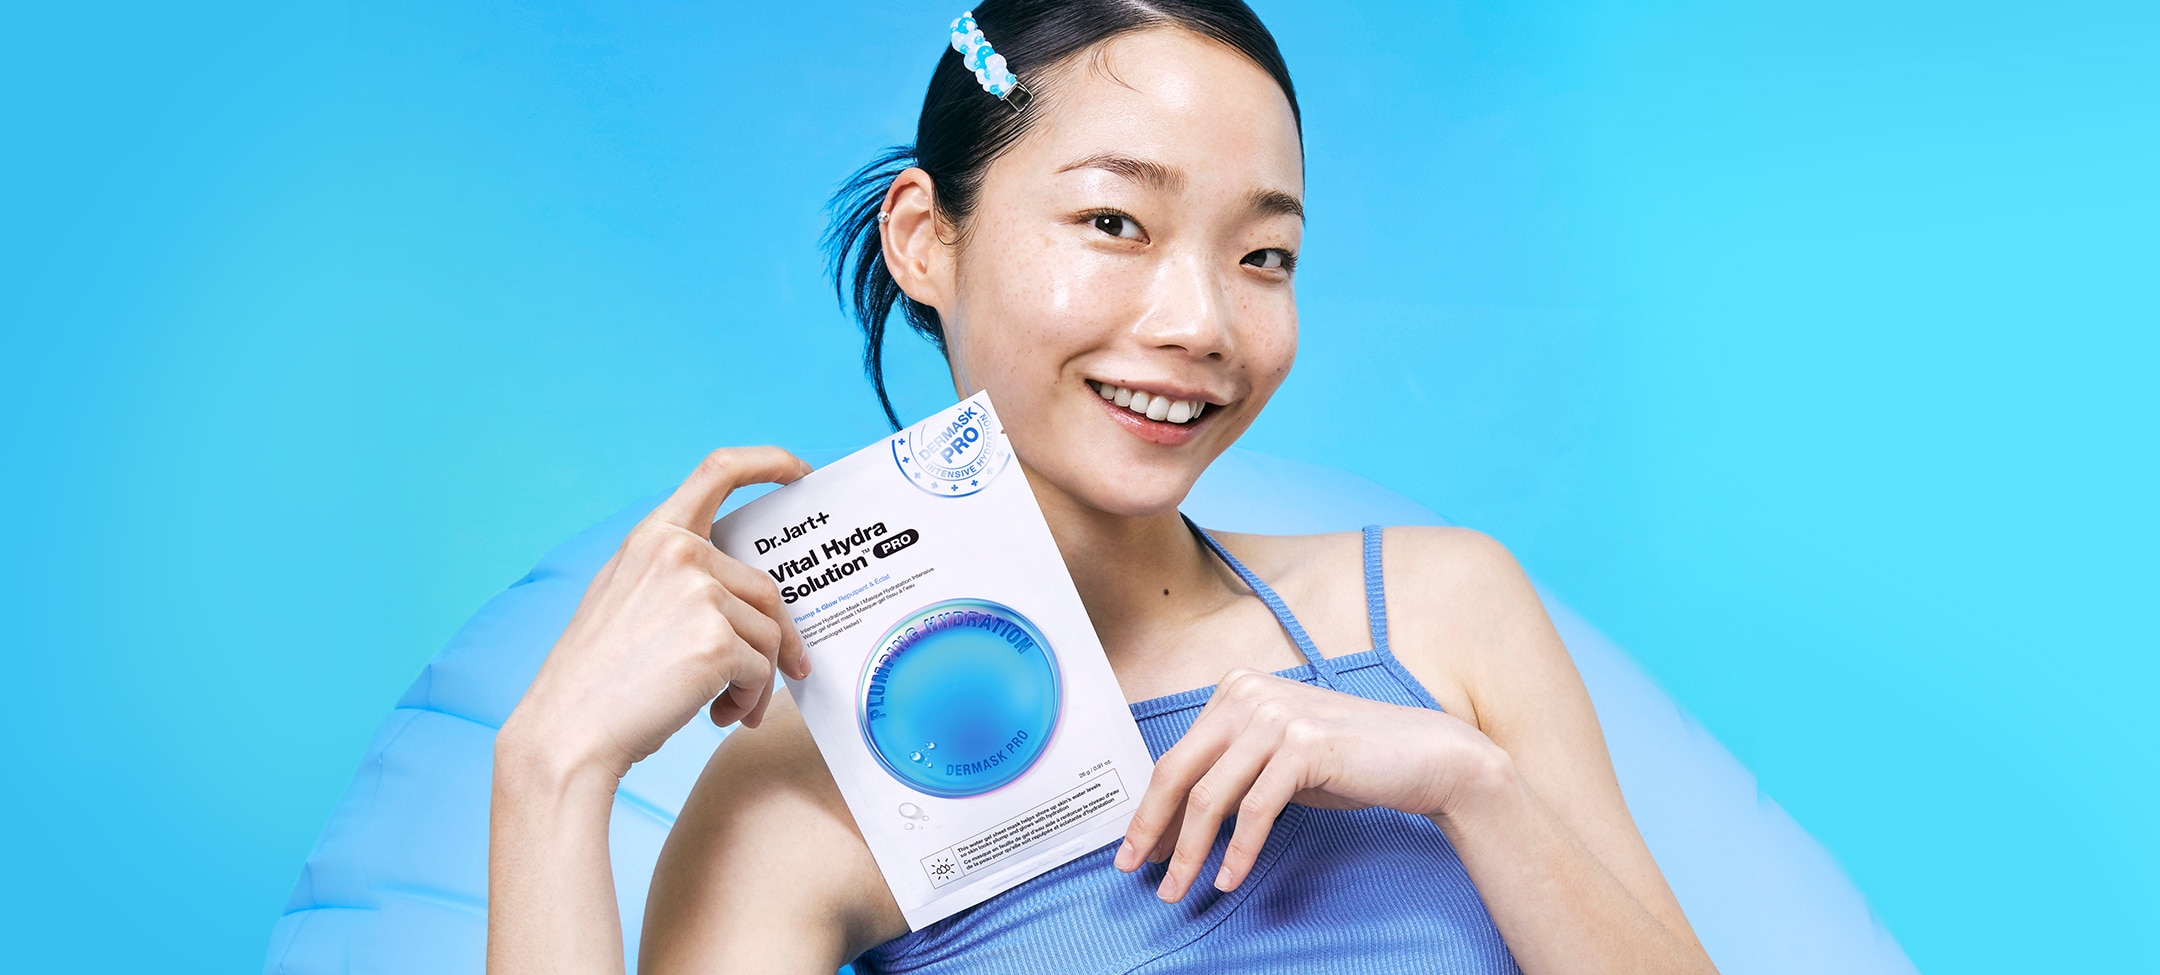 Woman with glowing moisturized skin holds Dr.Jart+'s moisturizing face mask